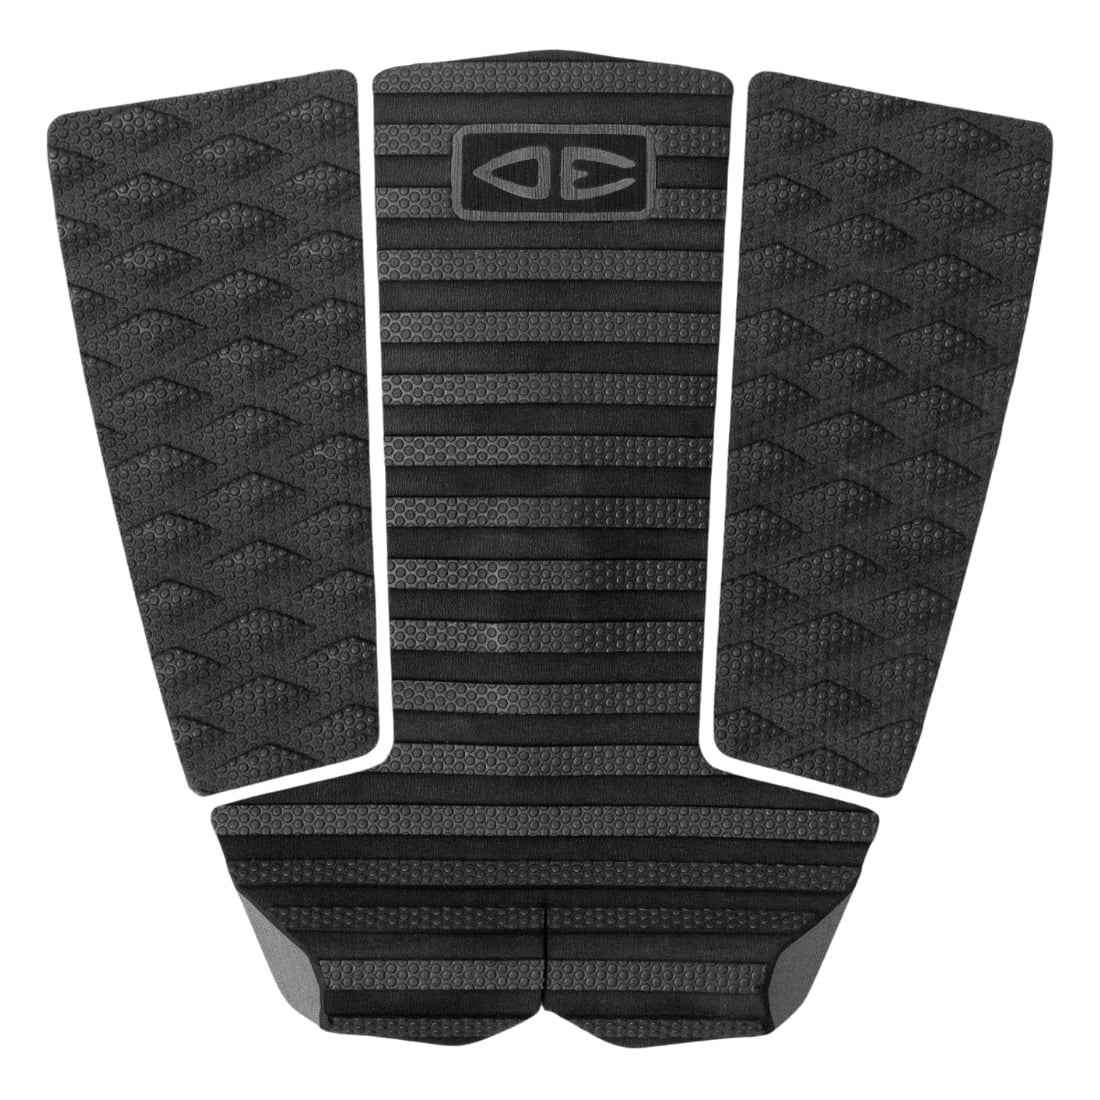 Ocean And Earth Owen Wright Lite Trac Surfboard Tail Pad - Black - 3 Piece Tail Pad by Ocean and Earth